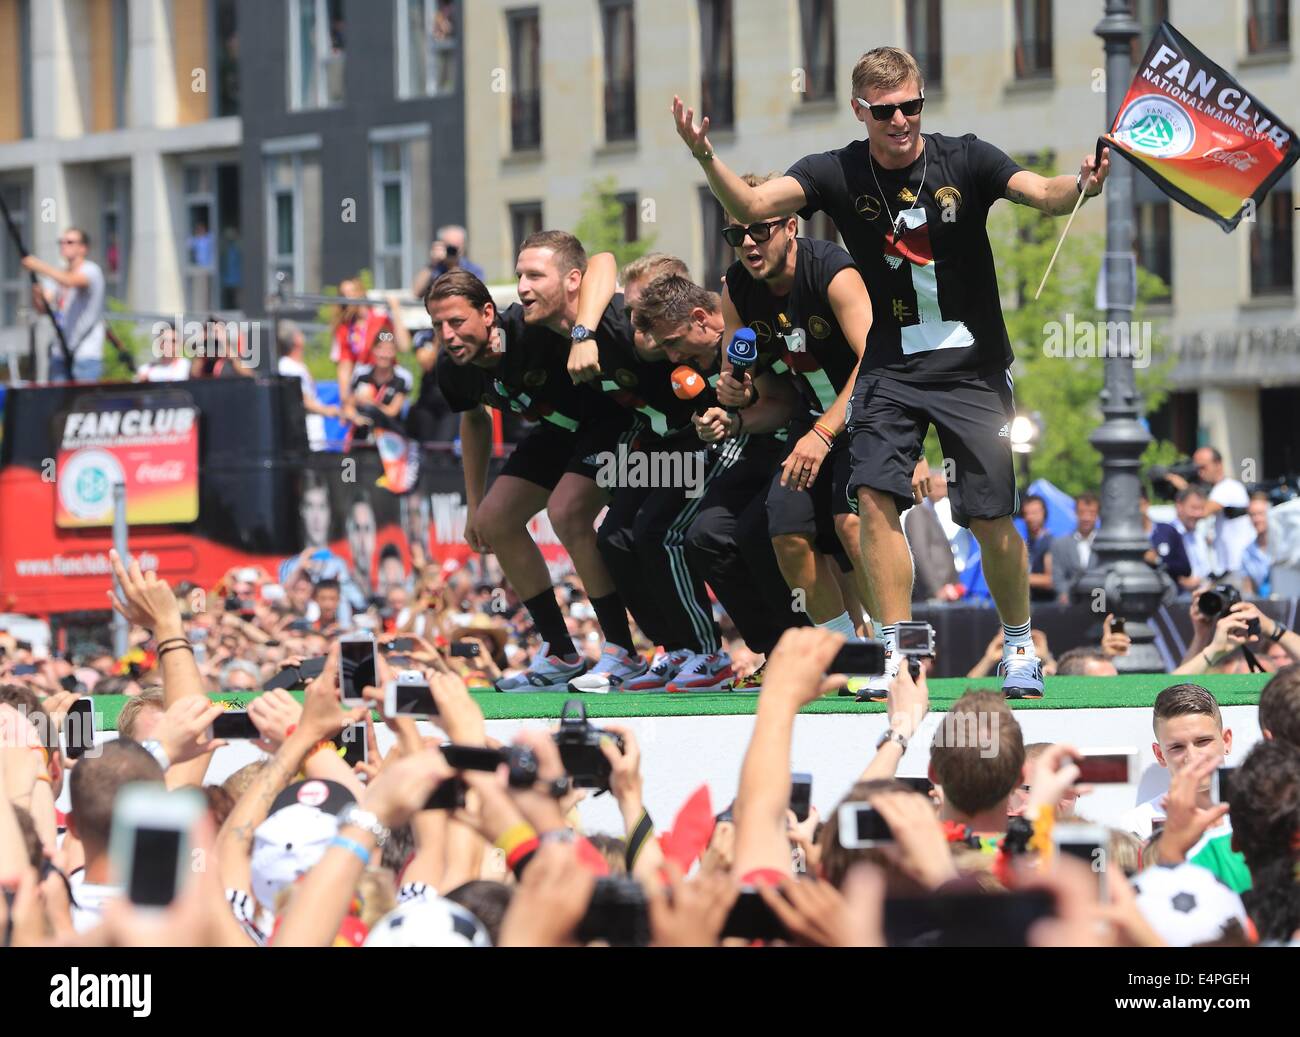 Germany's Toni Kroos (R-L), Mario Goetze, Miroslav Klose, Andre Schuerrle, Shkodran Mustafi and Roman Weidenfeller cheer and celebrate on stage during the welcome reception for Germany's national soccer team in front of the Brandenburg Gate, Berlin, Germany, 15 July 2014. The German team won the Brazil 2014 FIFA Soccer World Cup final against Argentina by 1-0 on 13 July 2014, winning the world cup title for the fourth time after 1954, 1974 and 1990. Photo: Jens Wolf/dpa Stock Photo